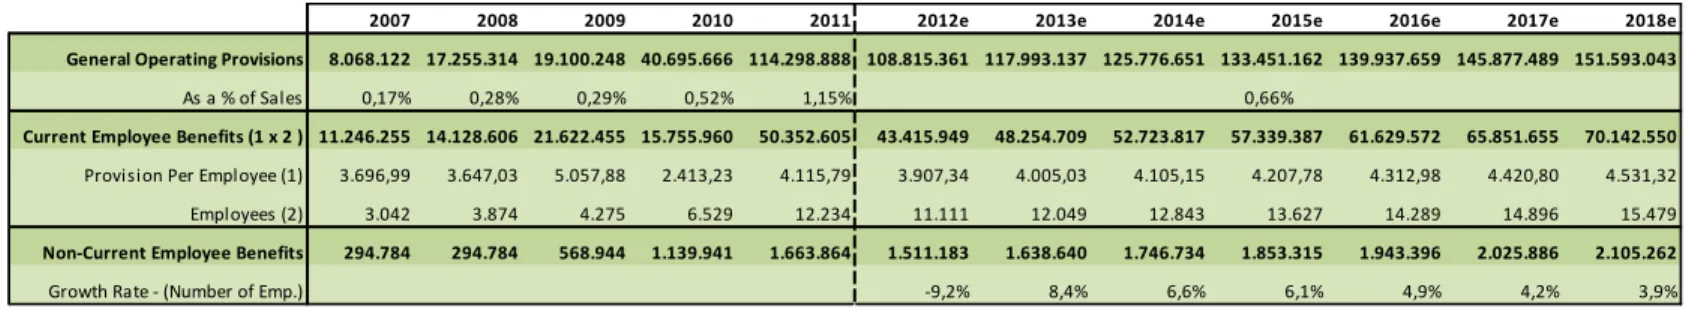 Table 3: Provisions Projections, Eurocash Annual Reports and Own Projections  